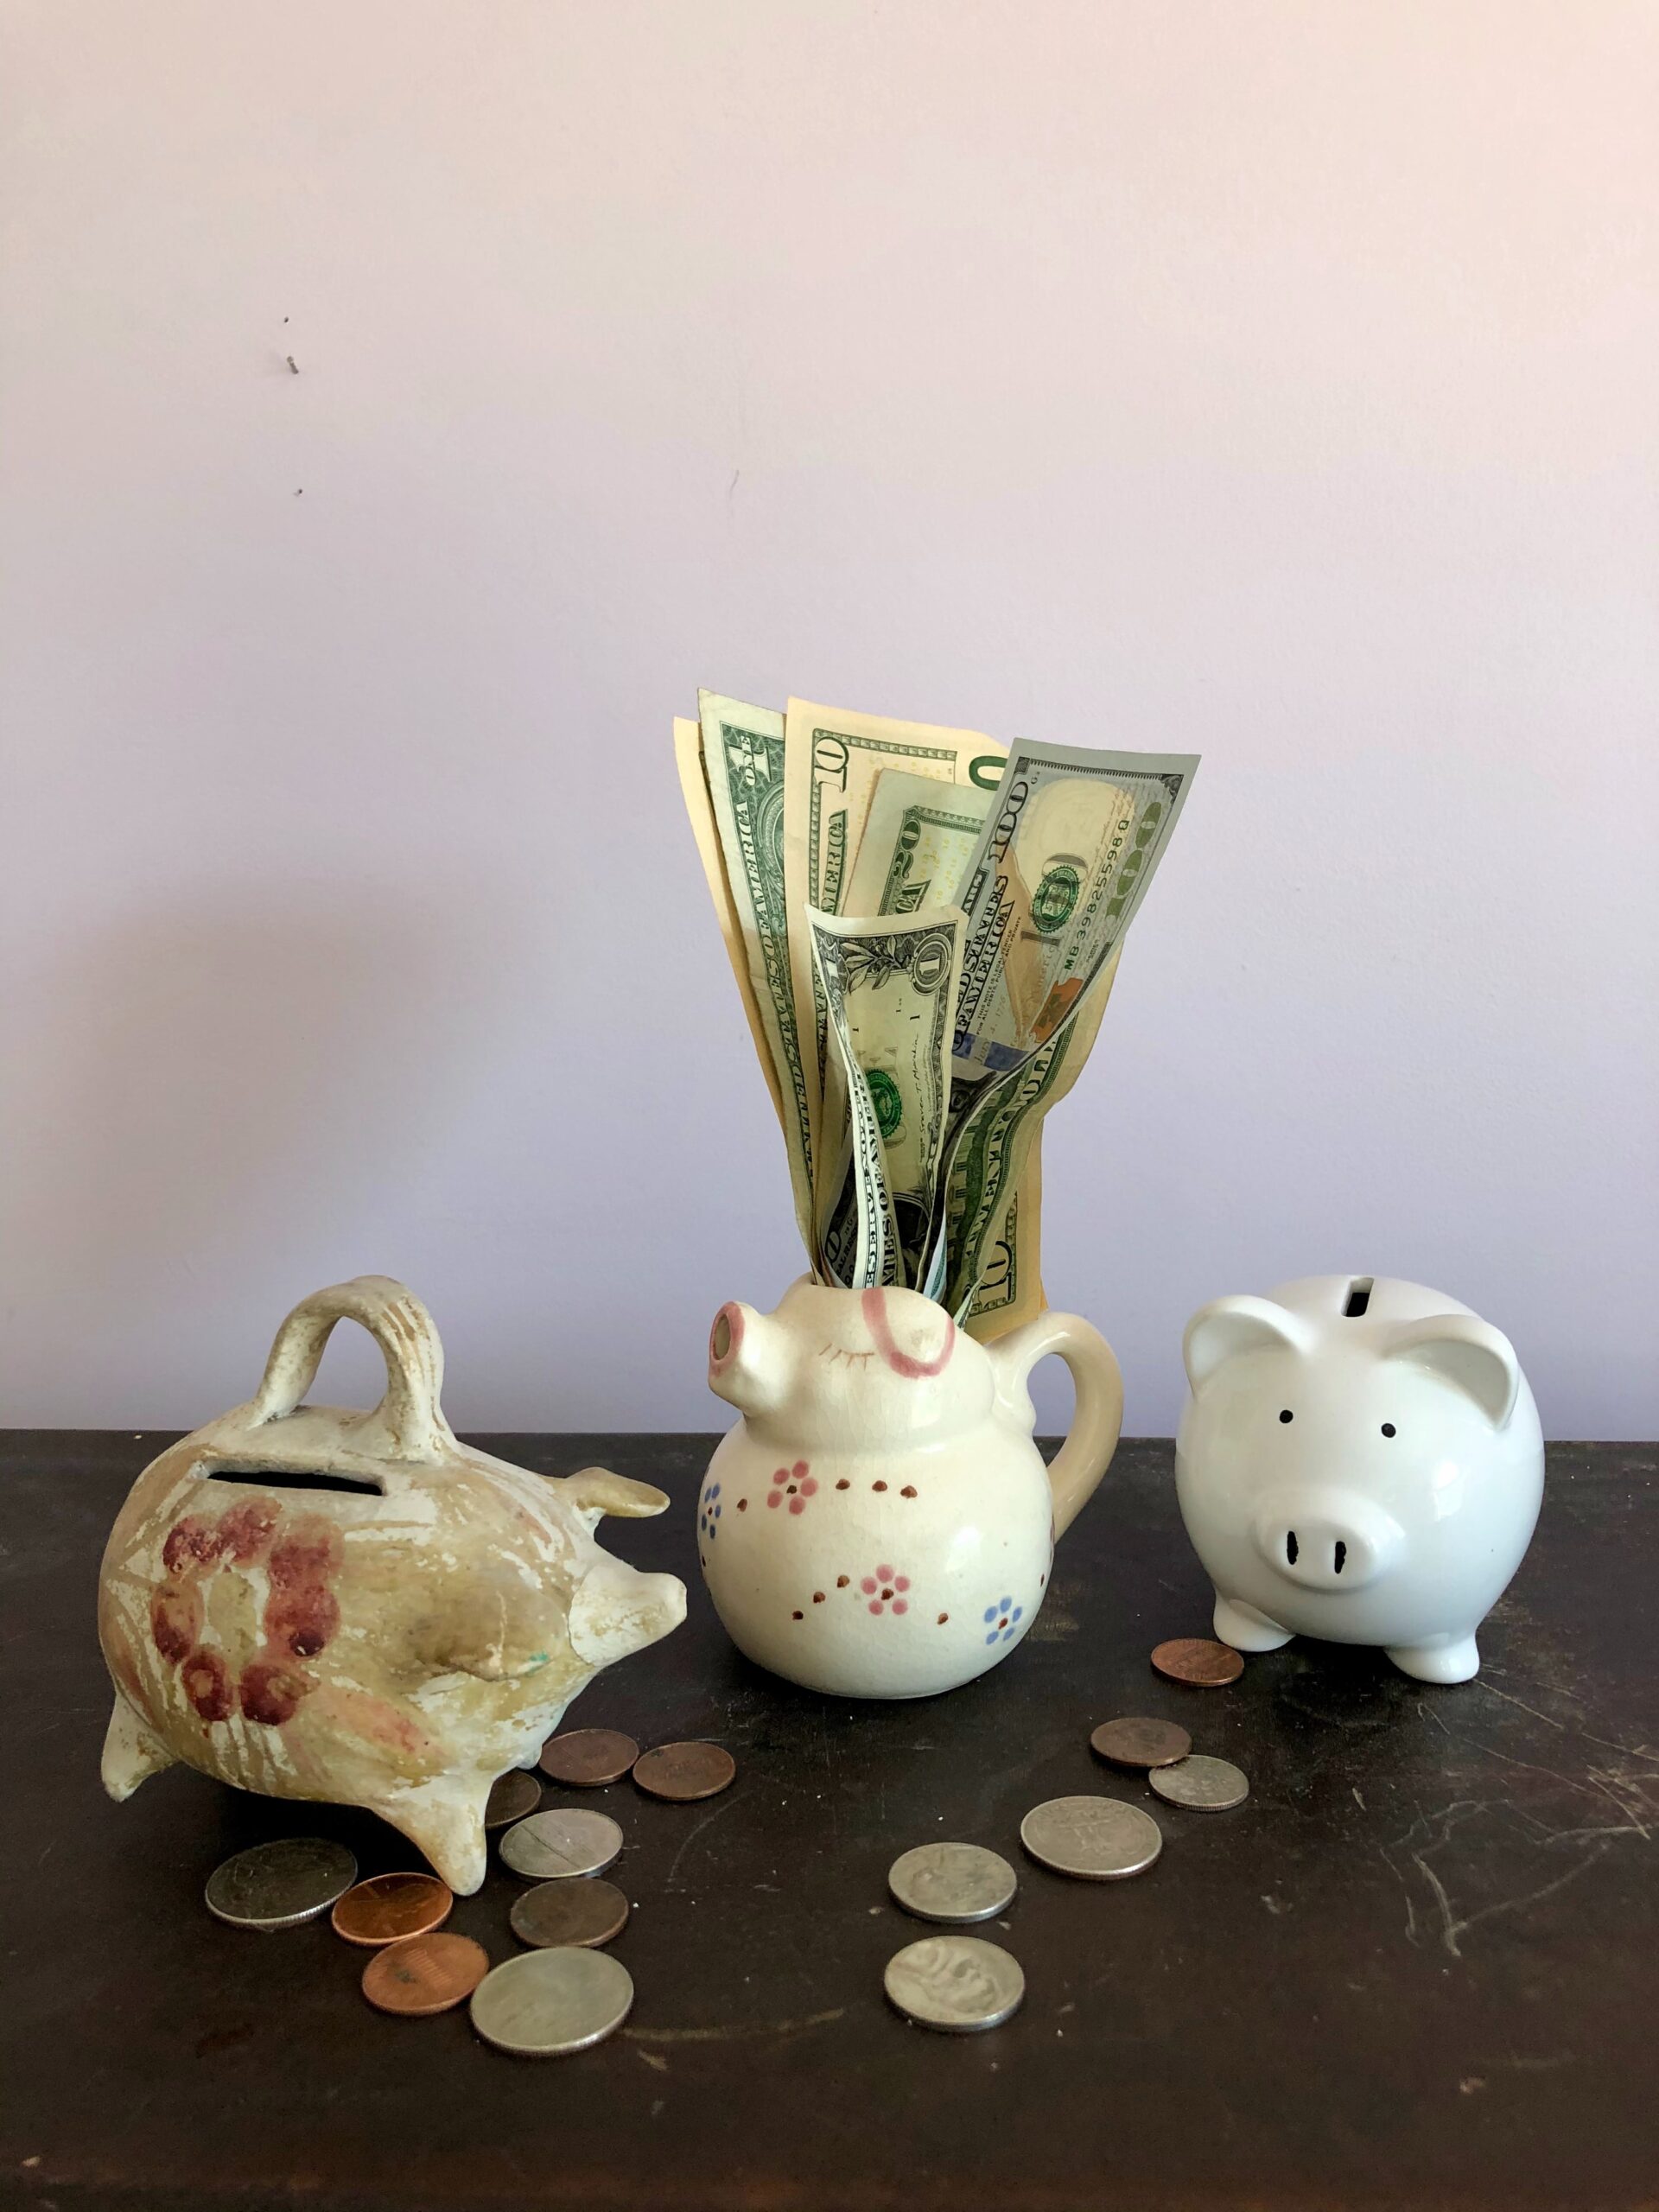 How to save money tips: Piggy bank